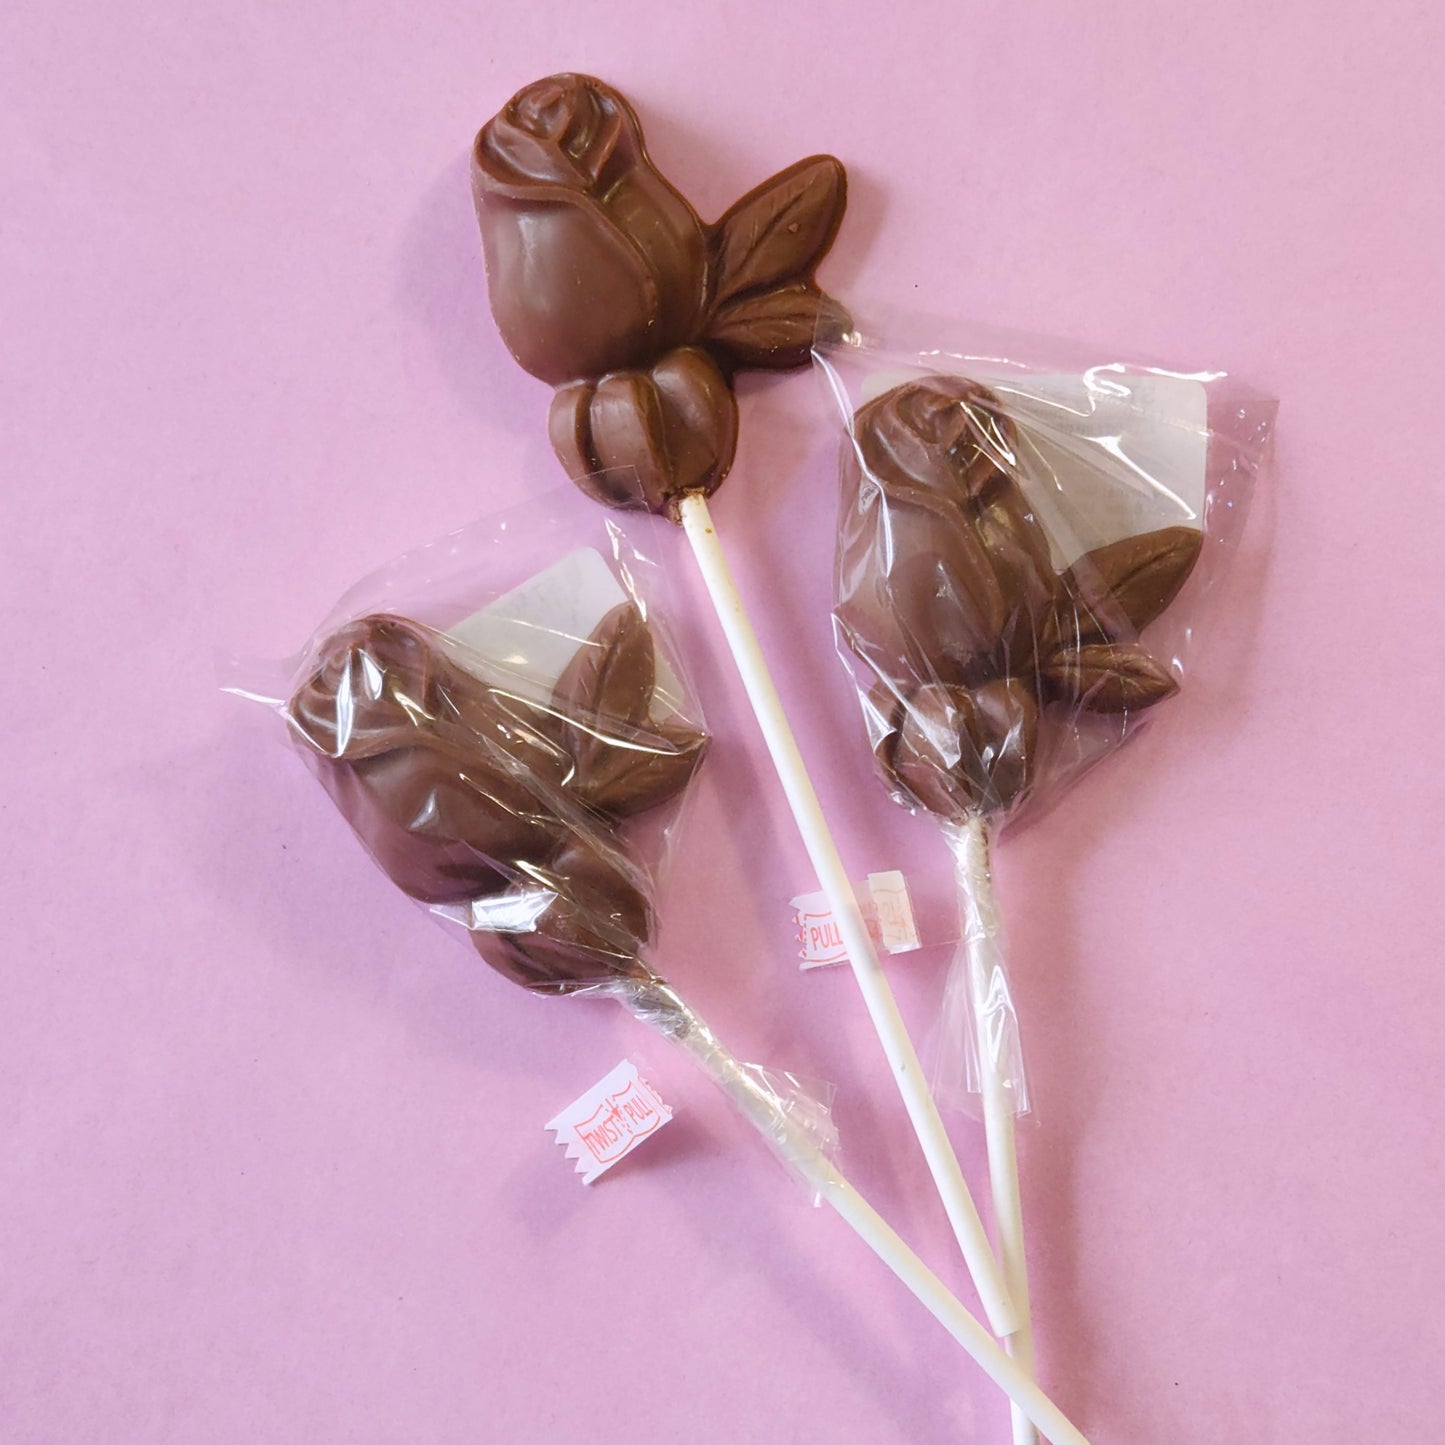 Give Mom the best of both worlds with flowers and Chocolate combined into one tasty treat. Our Chocolate Rose lollipops are the best Mother's Day gift!